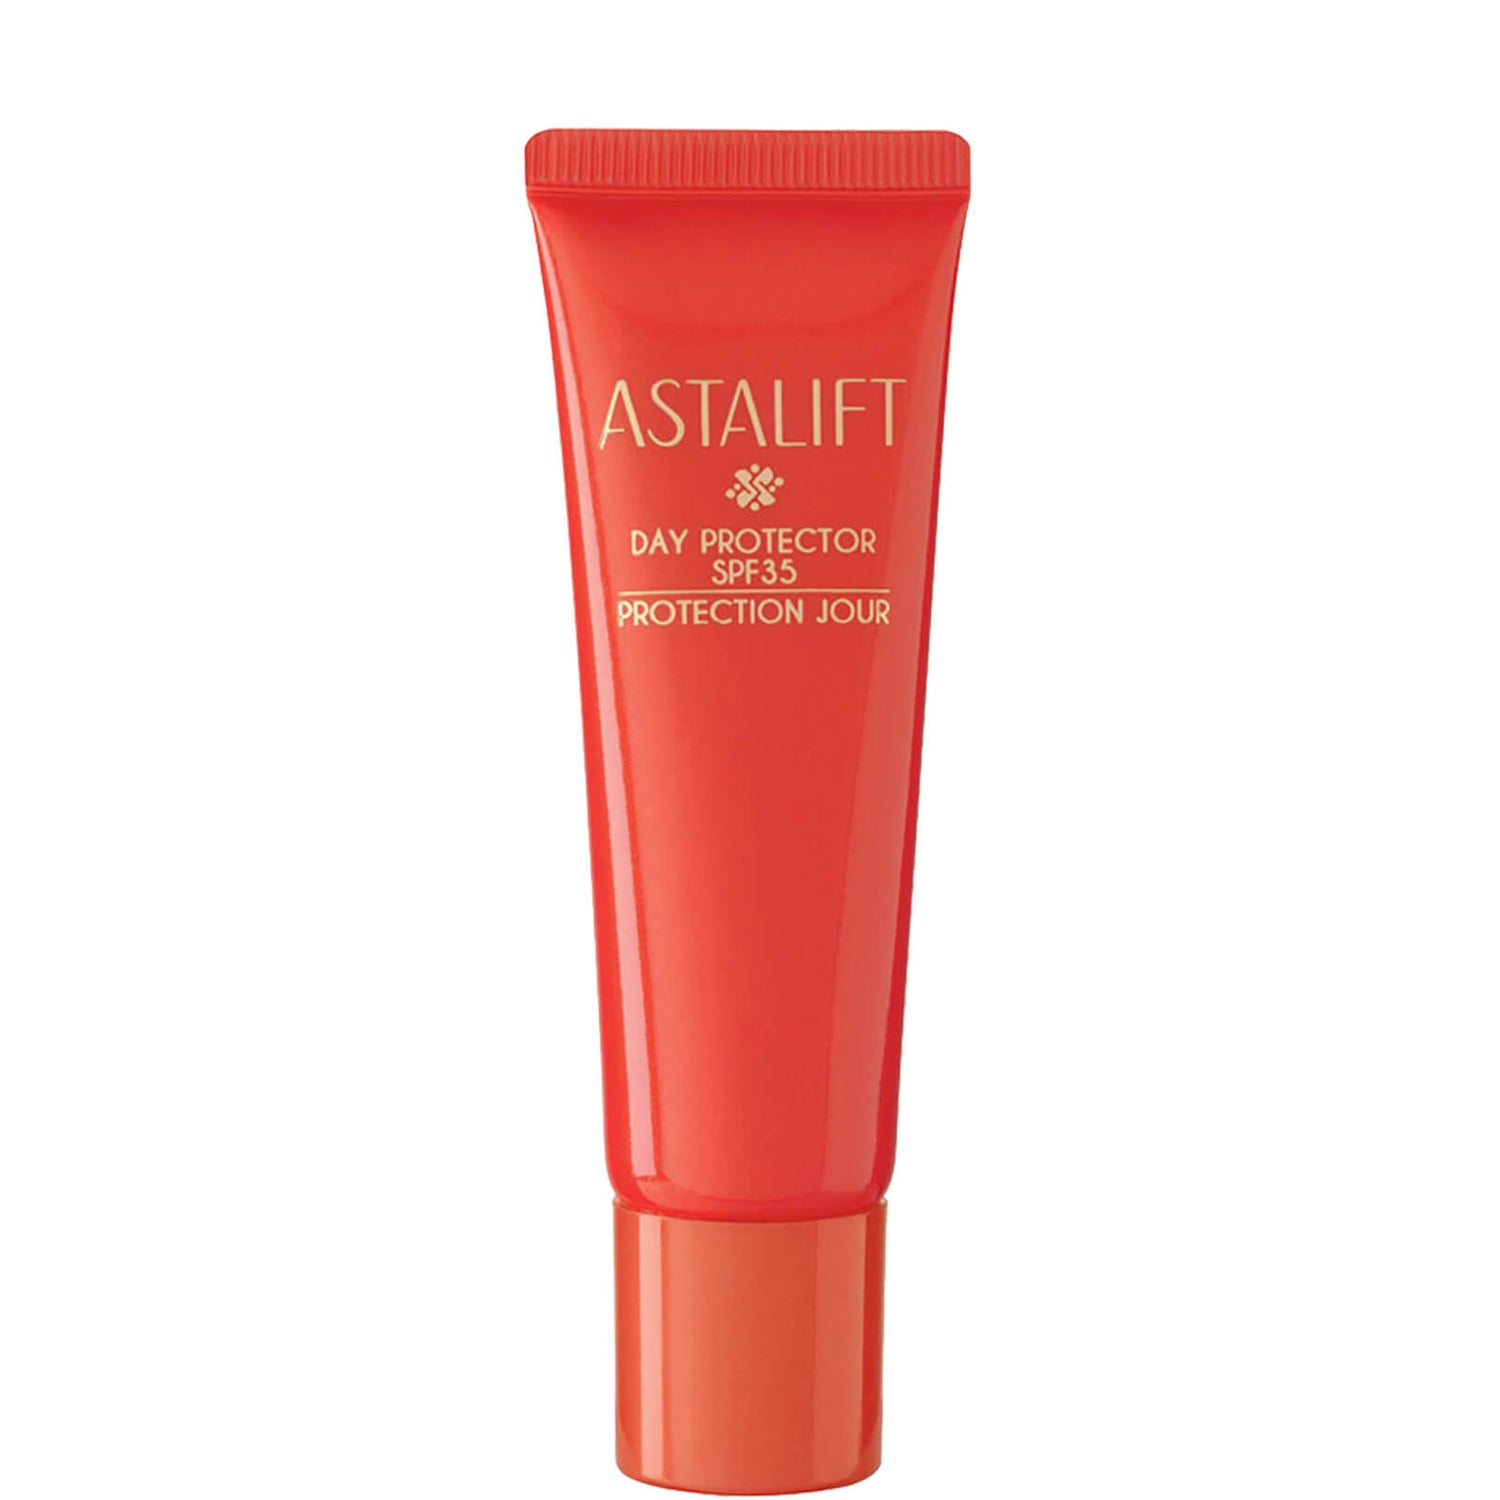 Astalift SPF 35 Day Protector Lotion (30g)